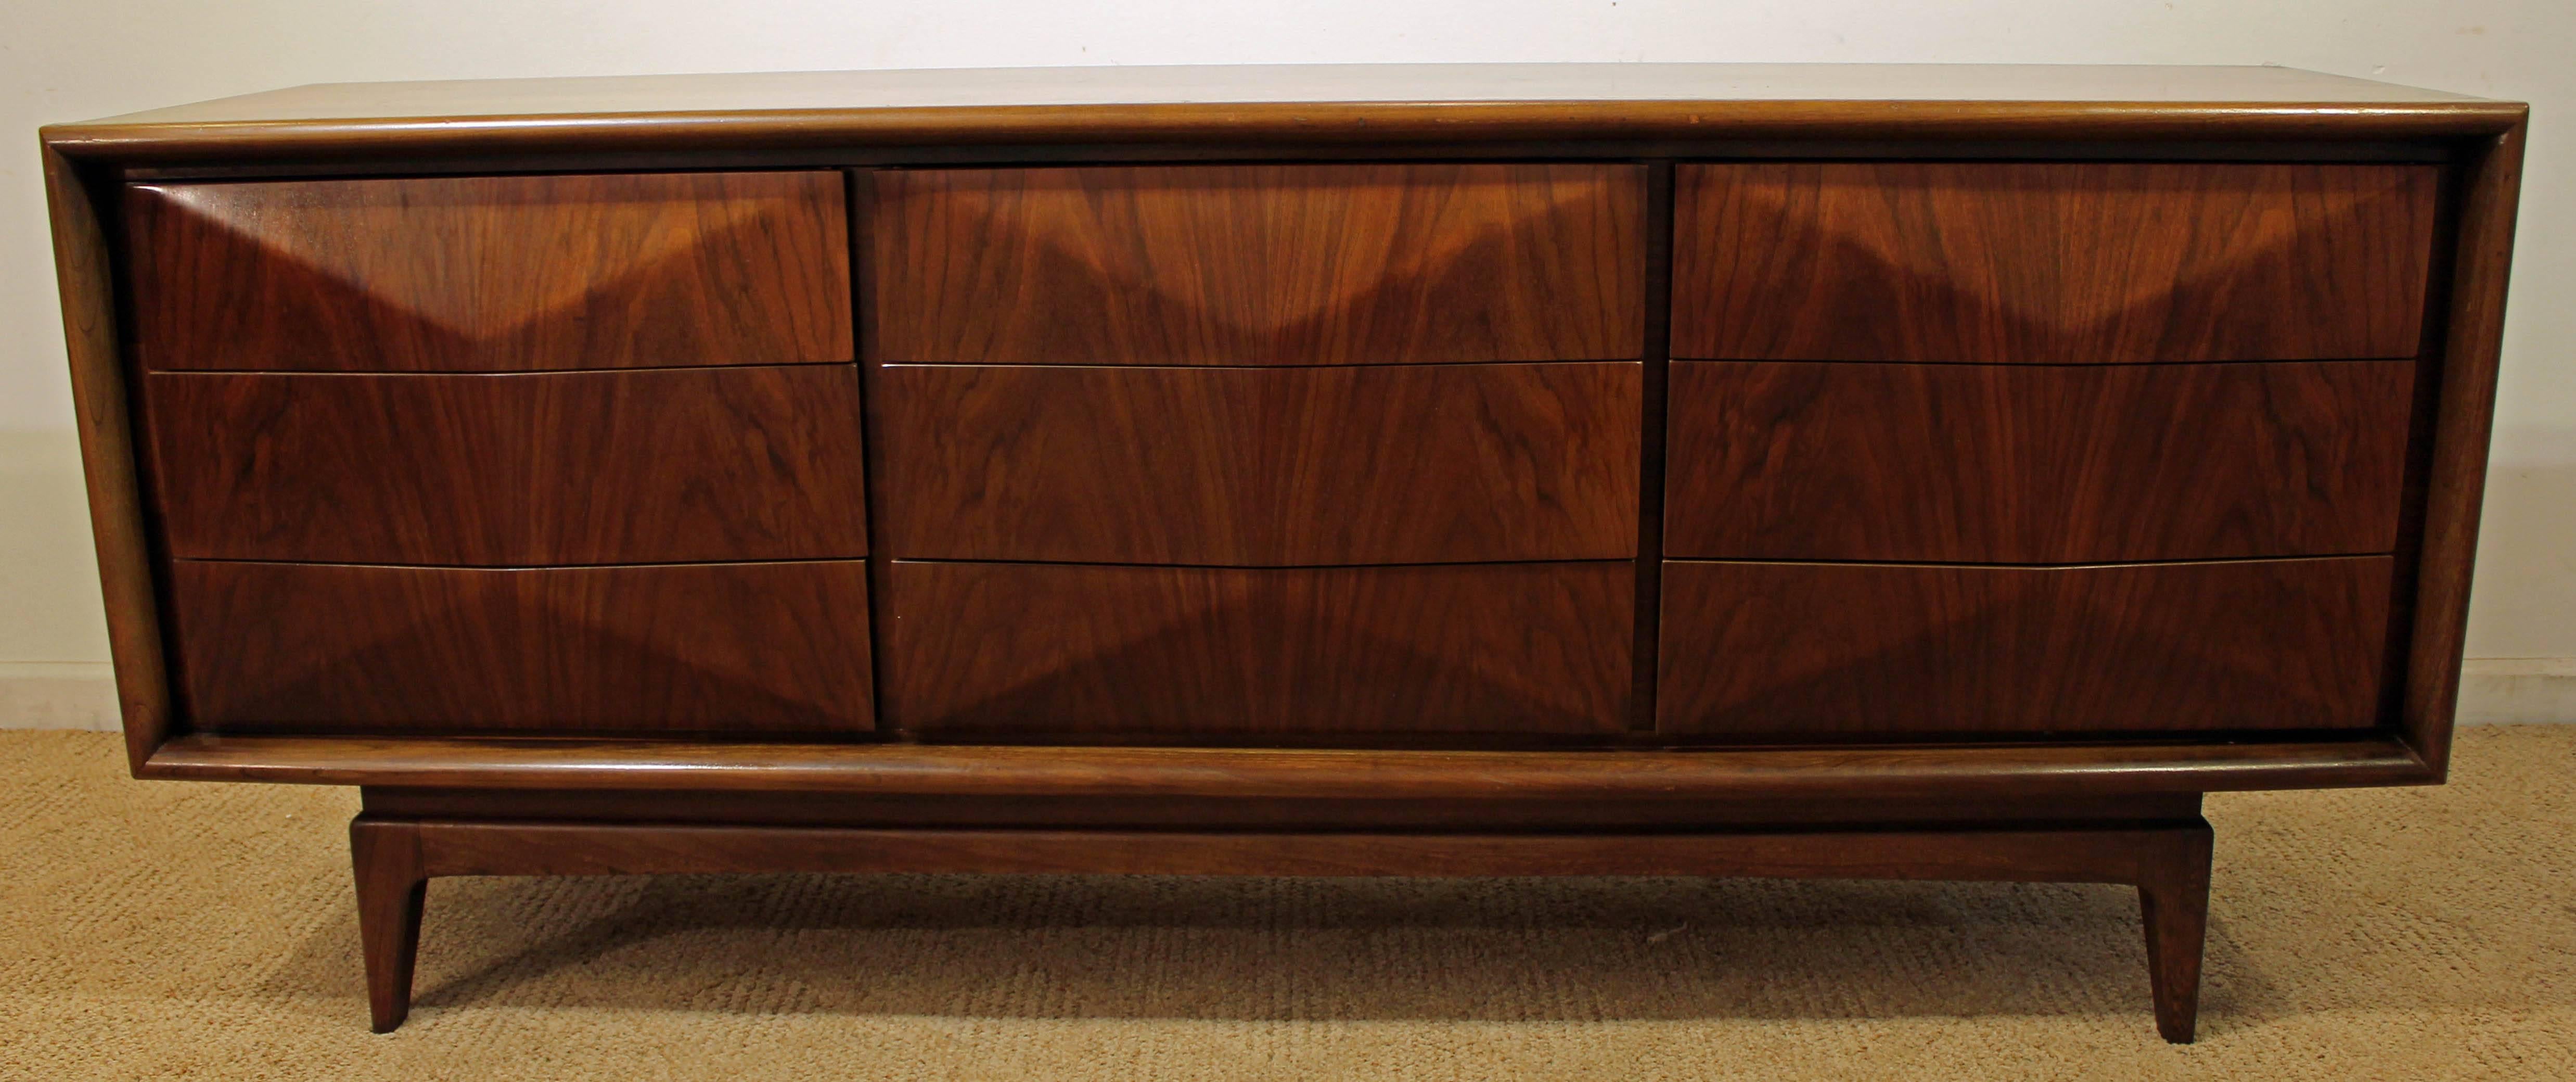 Offered is a walnut credenza or dresser made by United Furniture. This piece came with a matching bedroom set, which can be found in our other listings. The piece is in excellent condition for its age, shows minor wear. See our other listings for a